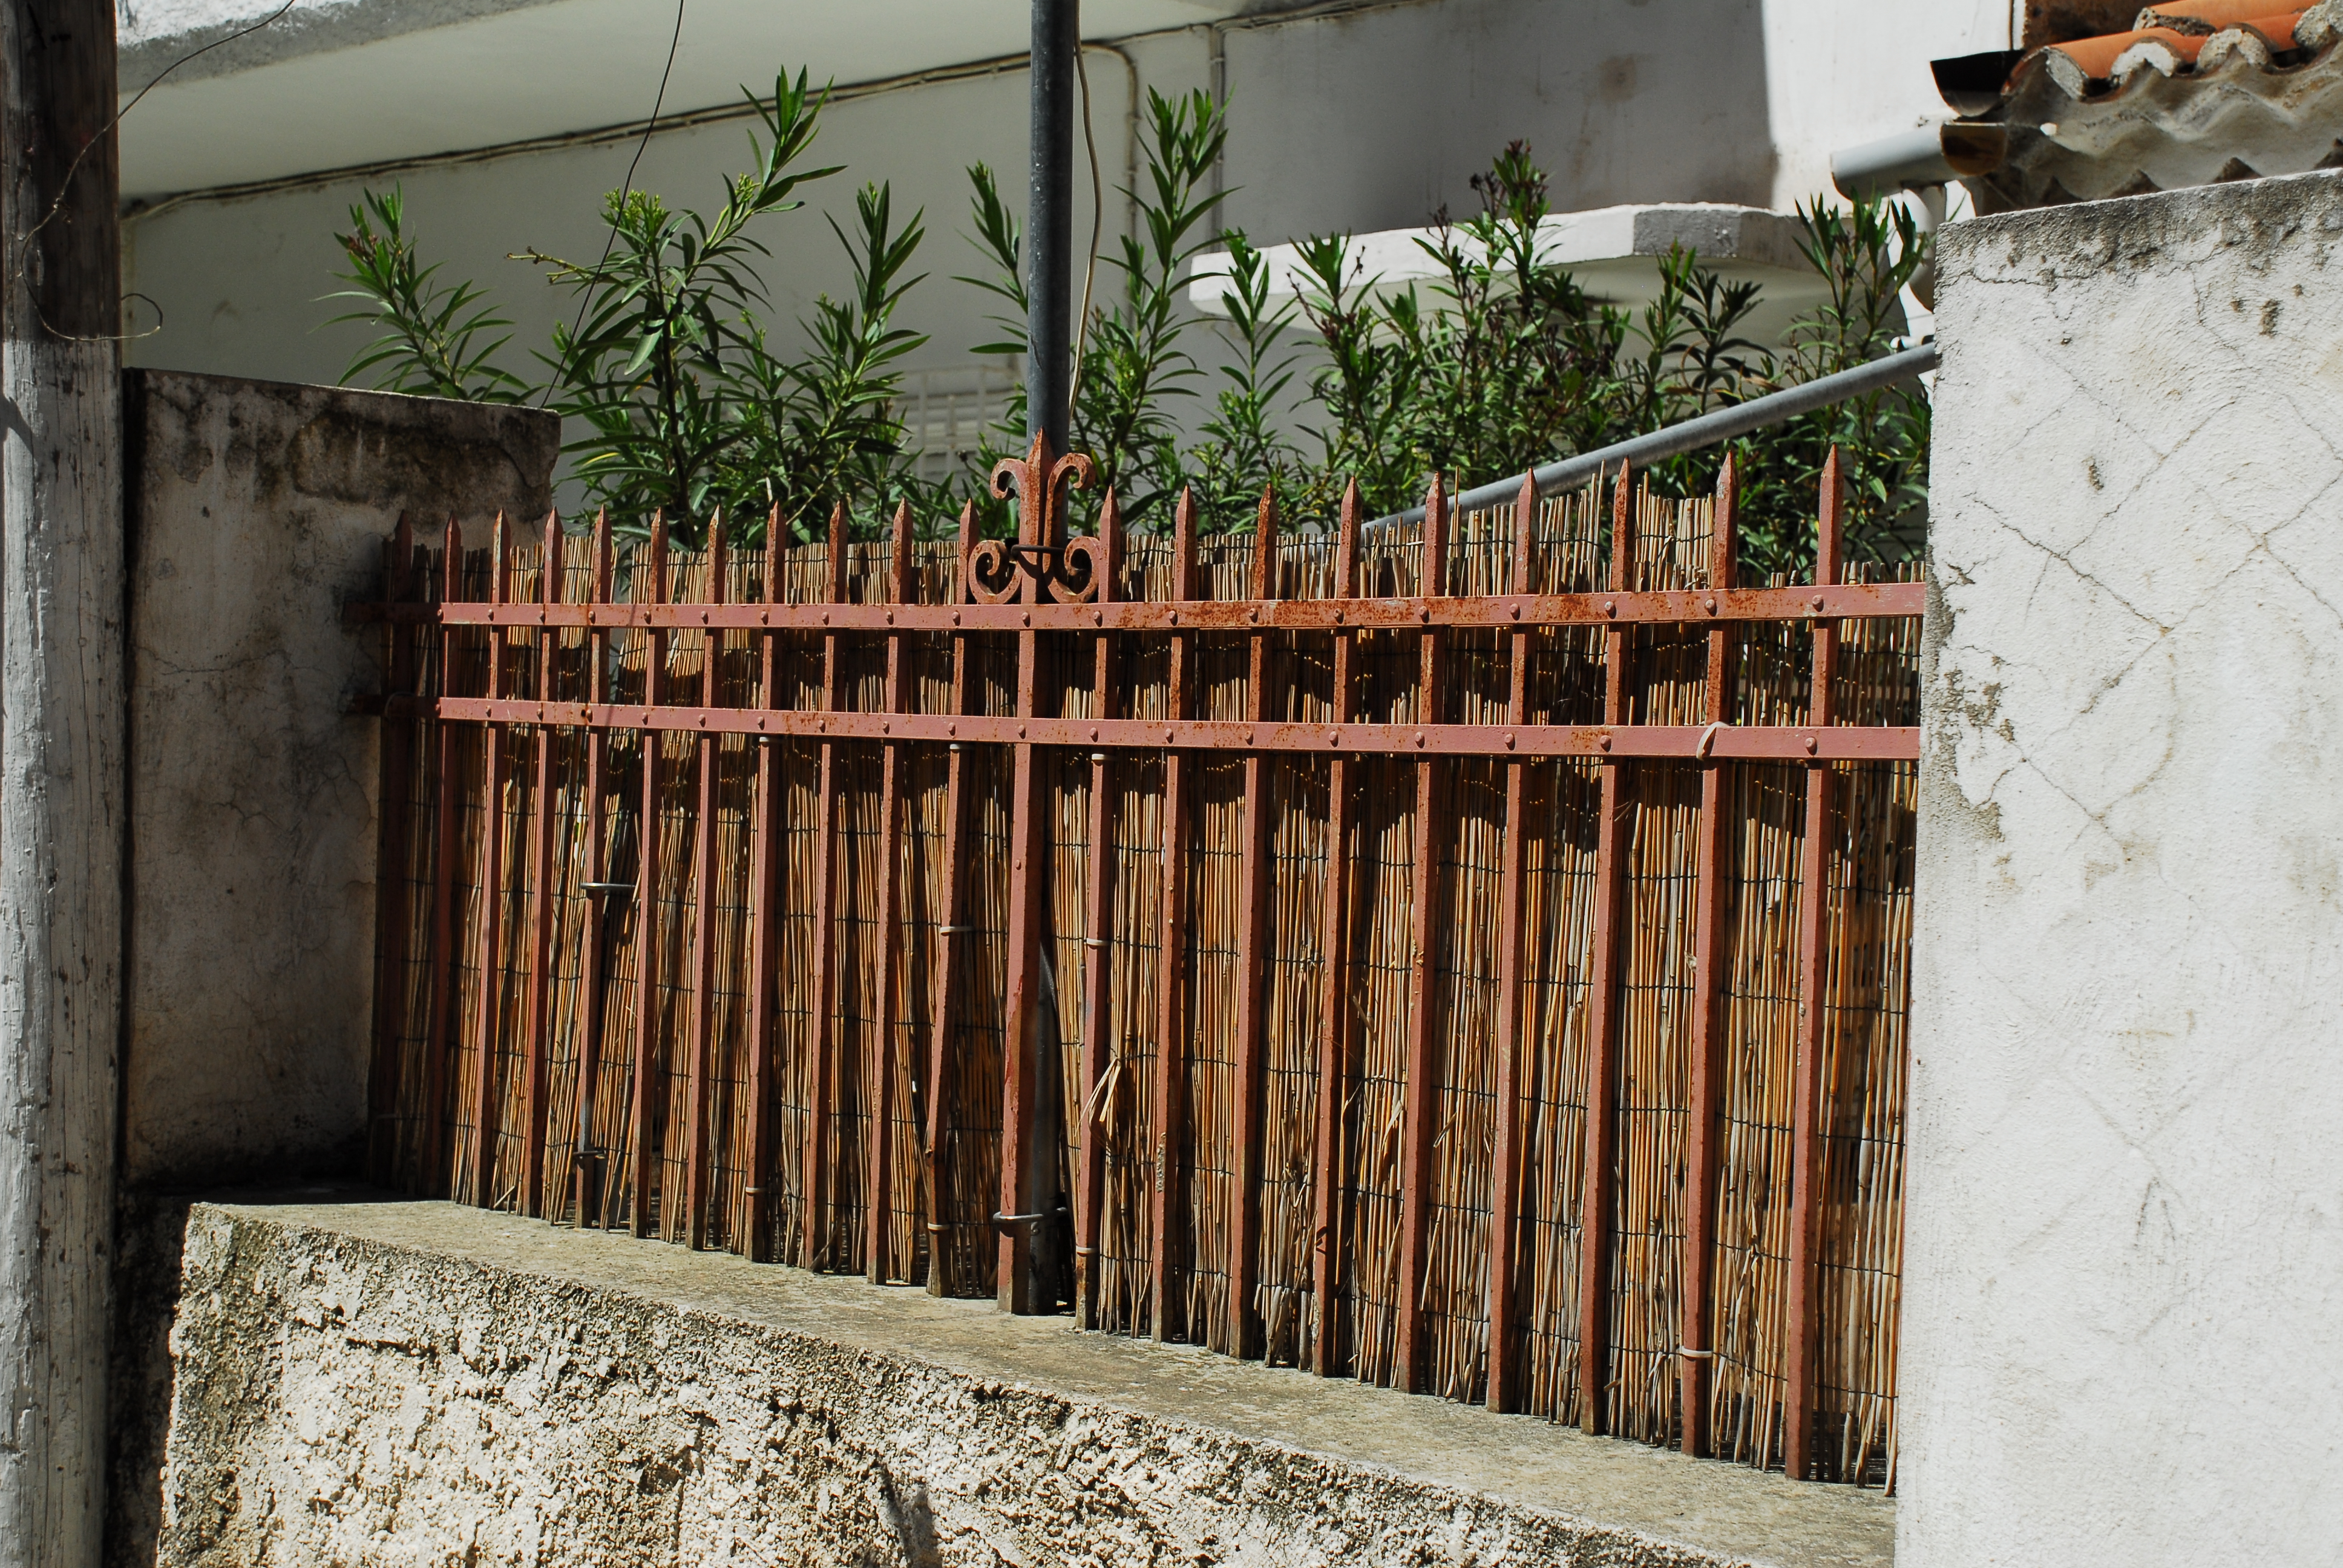 Railing of outdoor wall